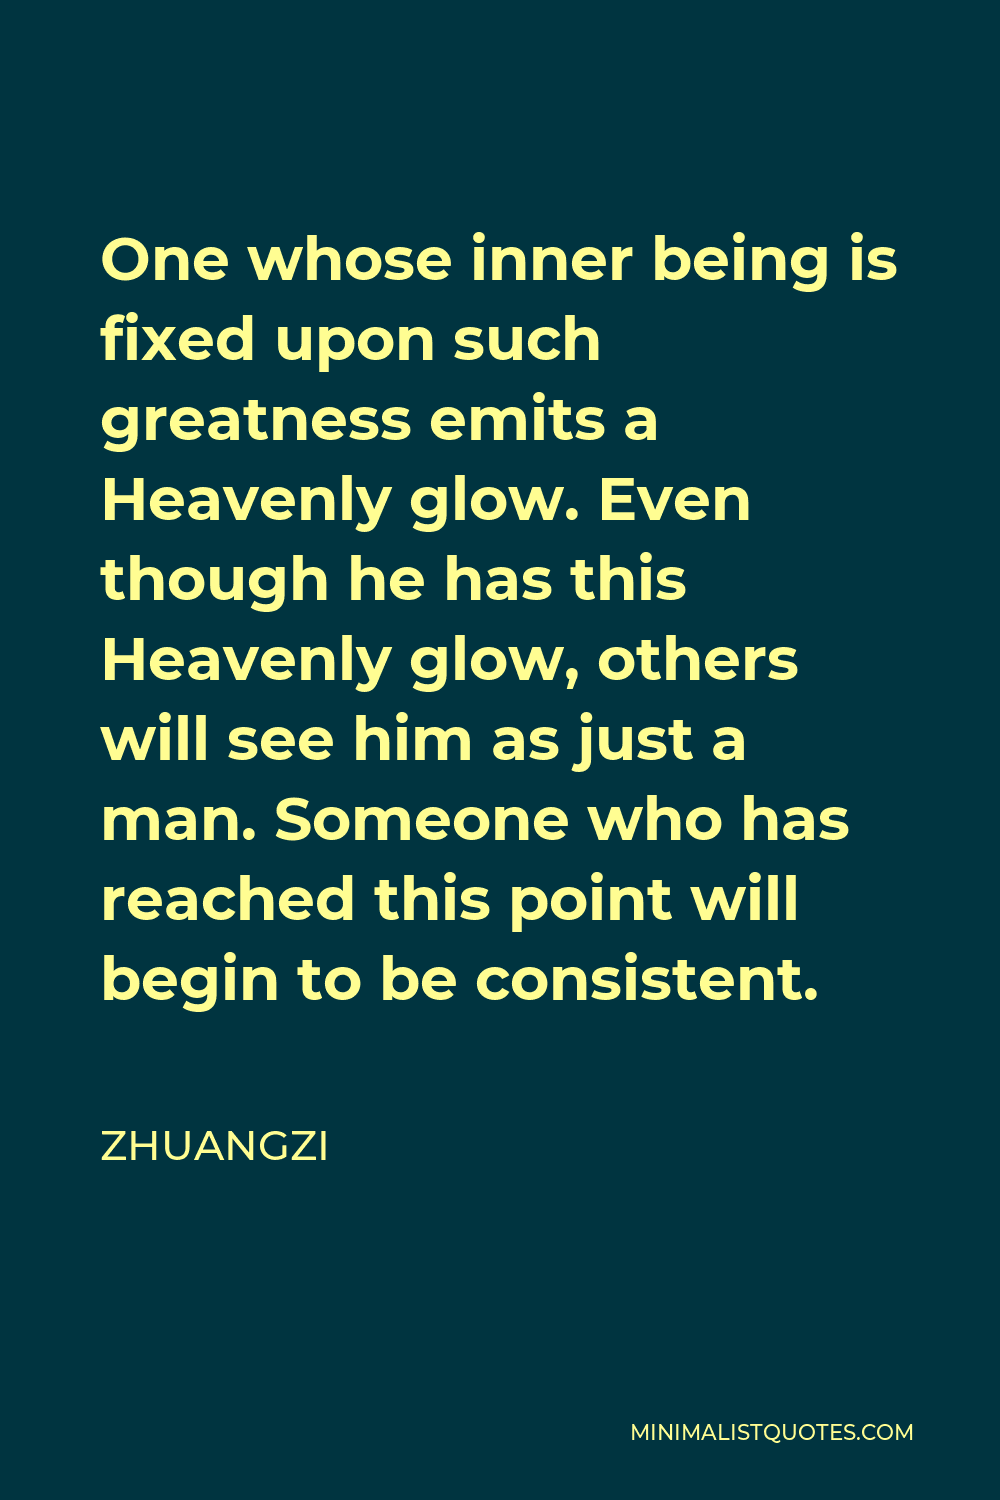 Zhuangzi Quote - One whose inner being is fixed upon such greatness emits a Heavenly glow. Even though he has this Heavenly glow, others will see him as just a man. Someone who has reached this point will begin to be consistent.